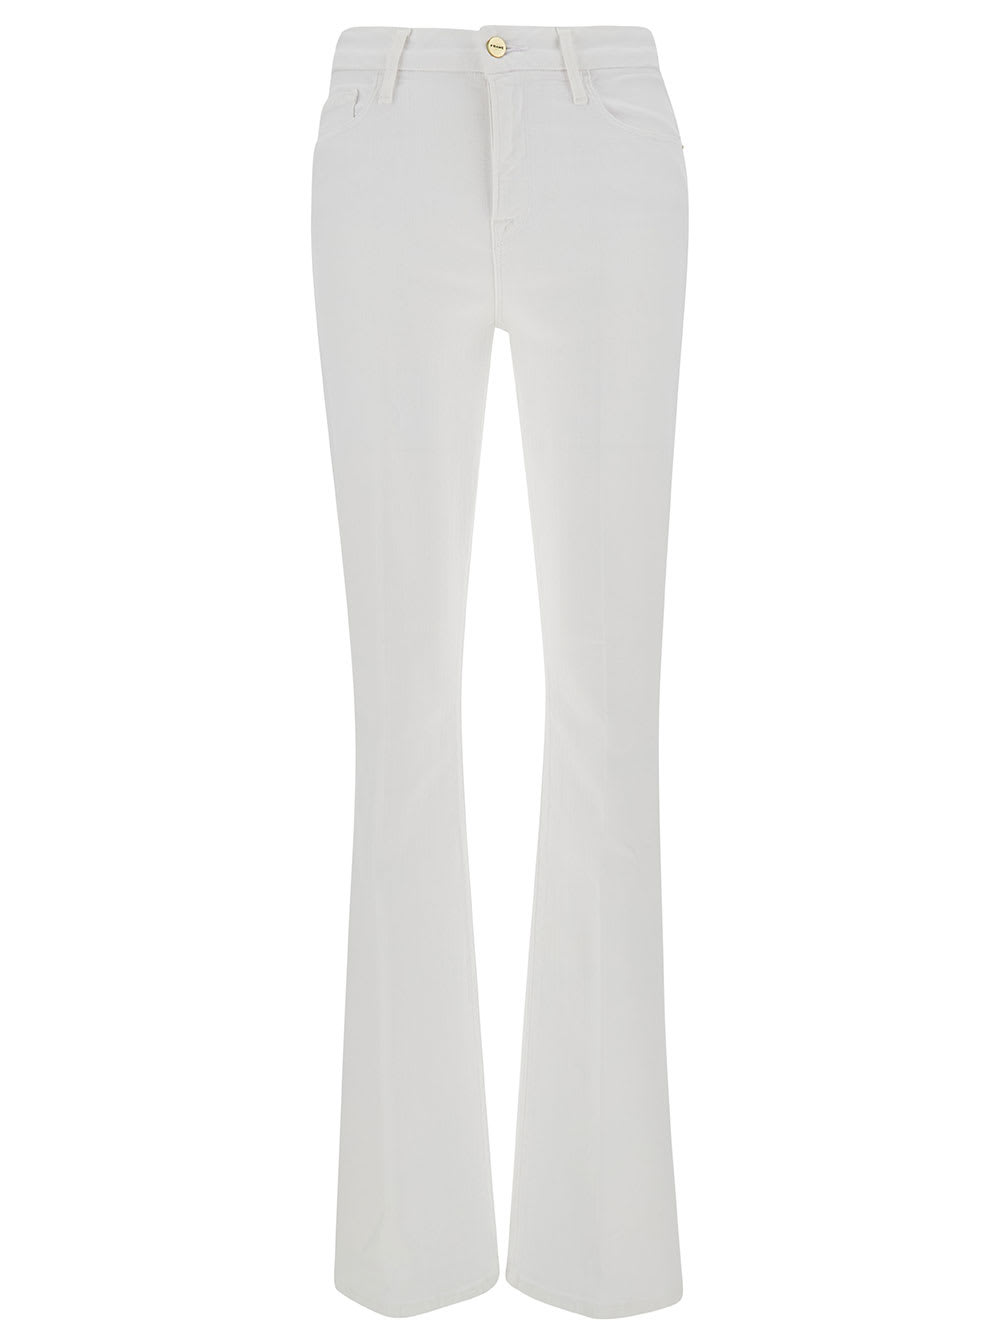 mini Boot White Flared Jeans With Branded Button In Cotton Blend Denim Woman